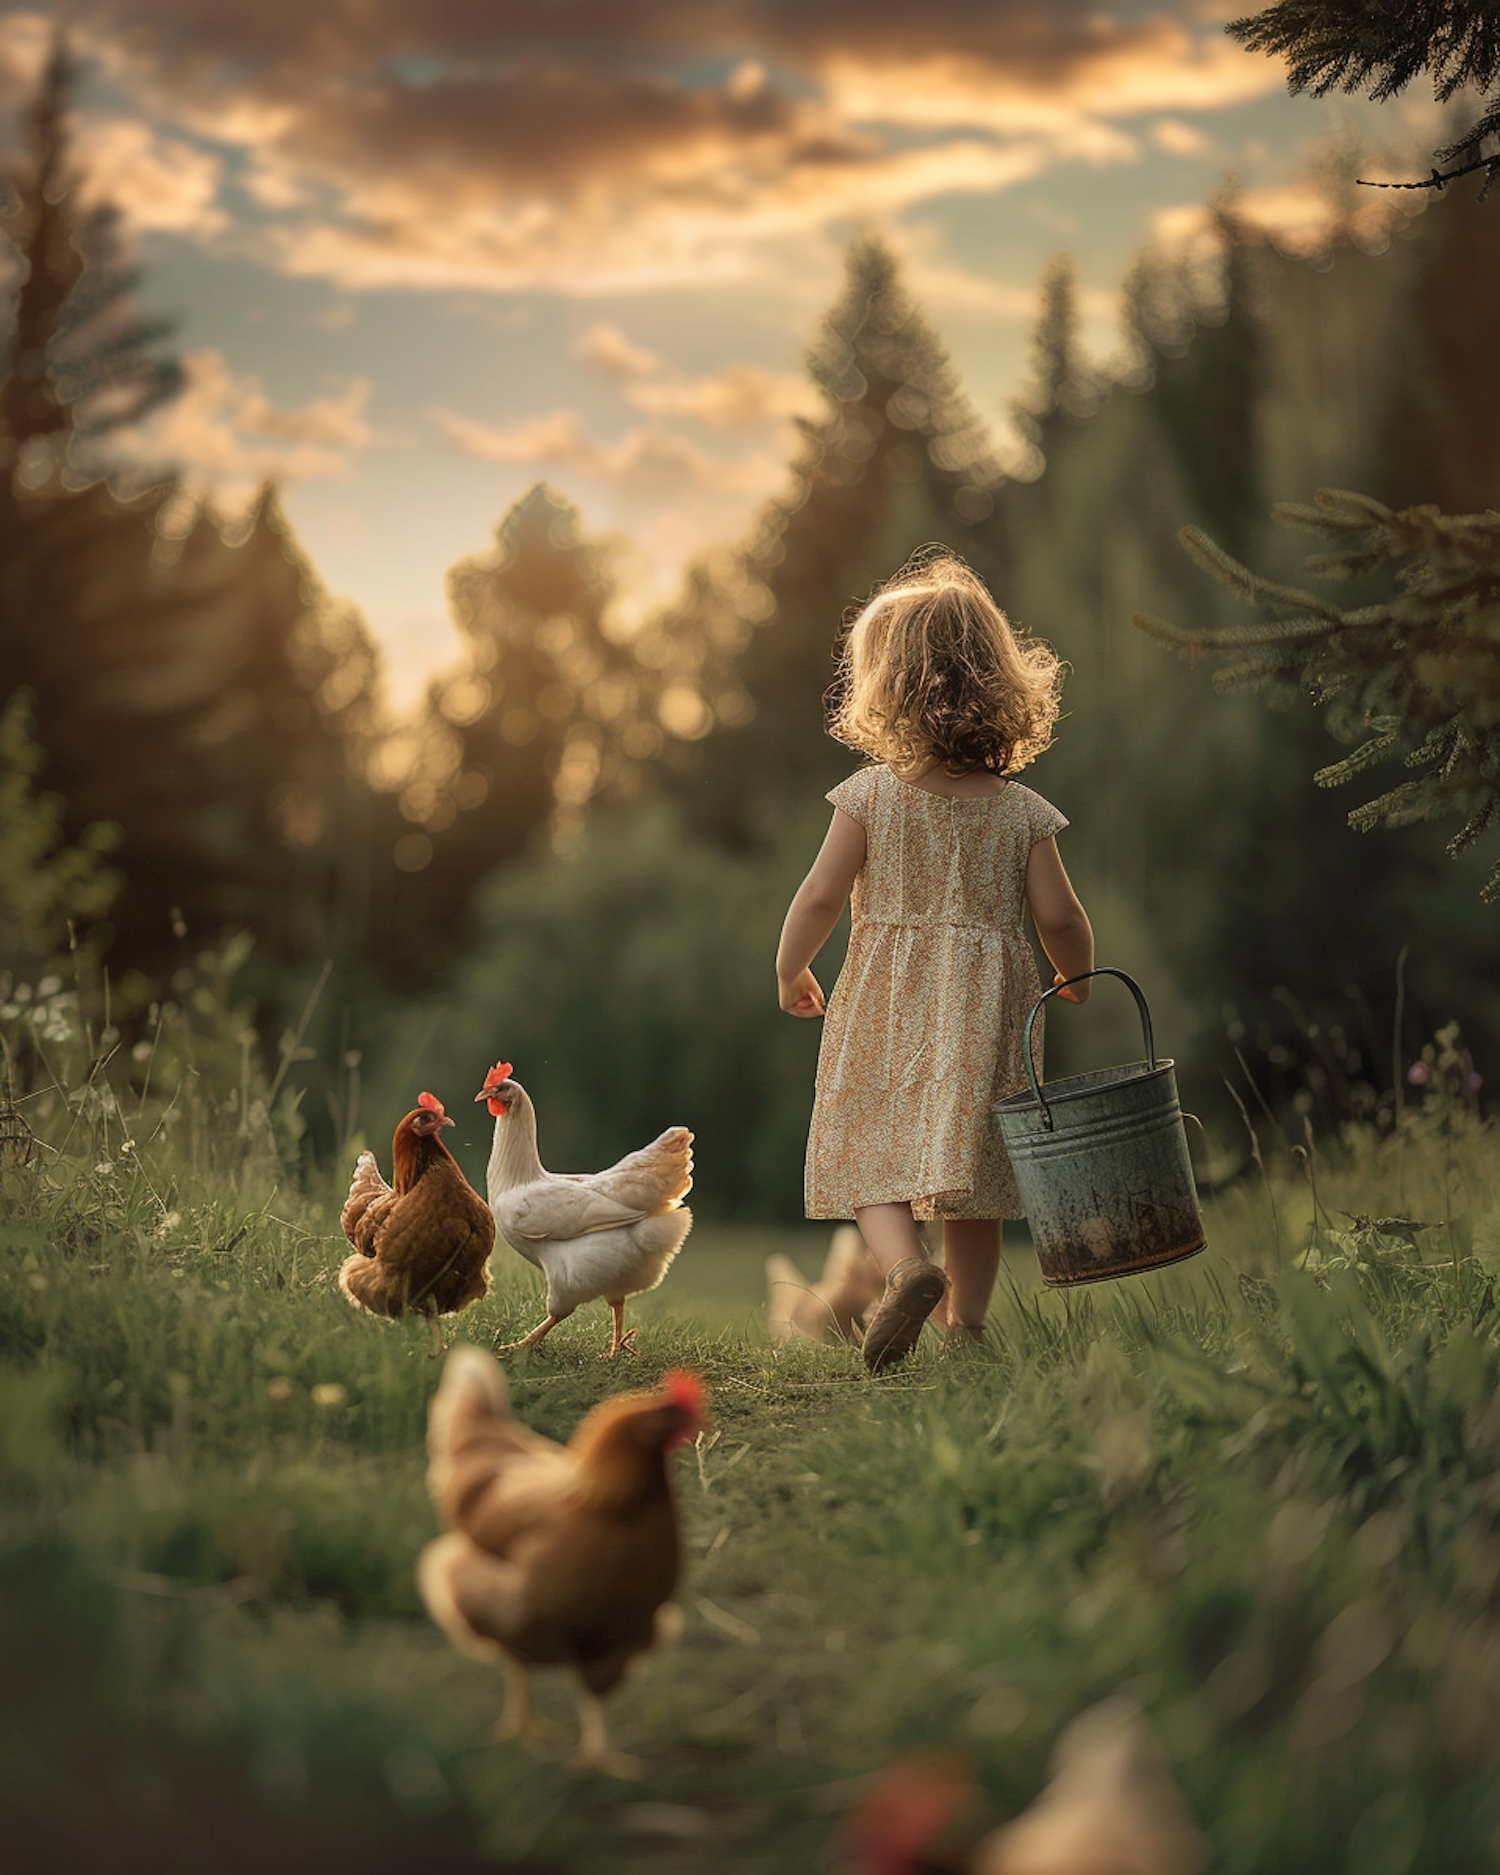 Girl Walking With Chickens at Sunset